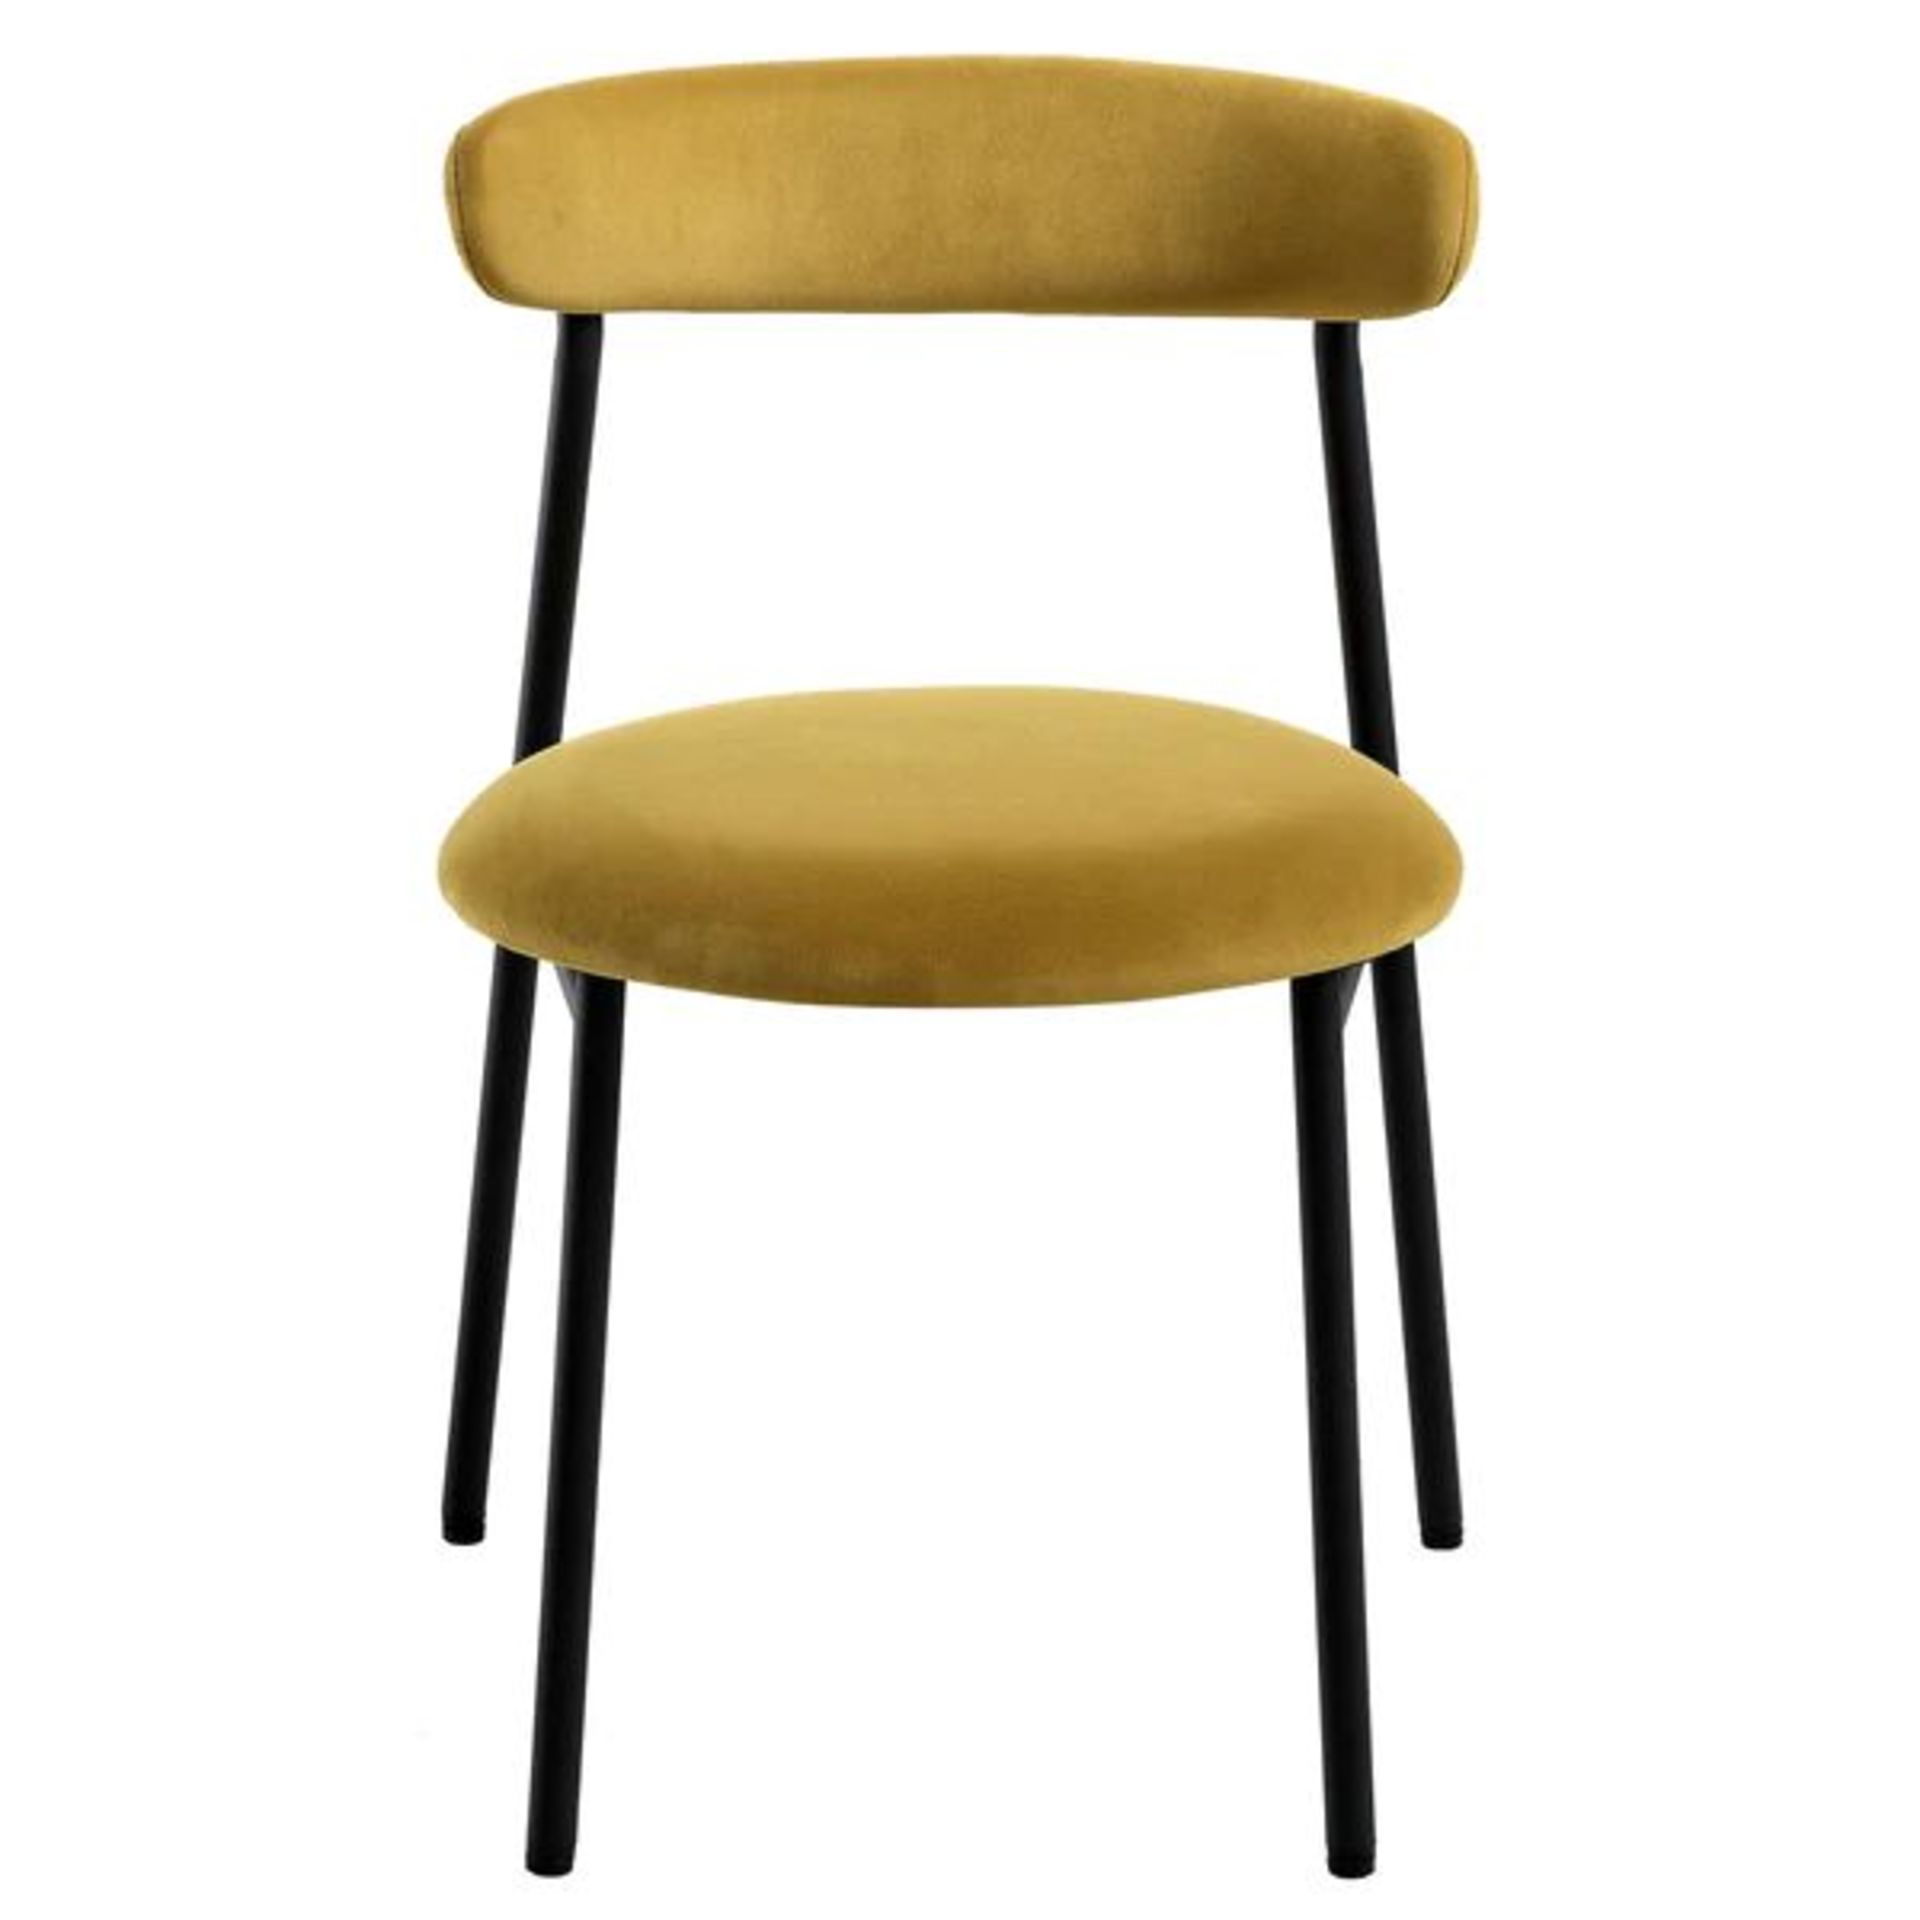 Donna Set of 2 Mustard Yellow Velvet Dining Chairs. -ER31. RRP £209.99. With slightly curved back - Image 2 of 2